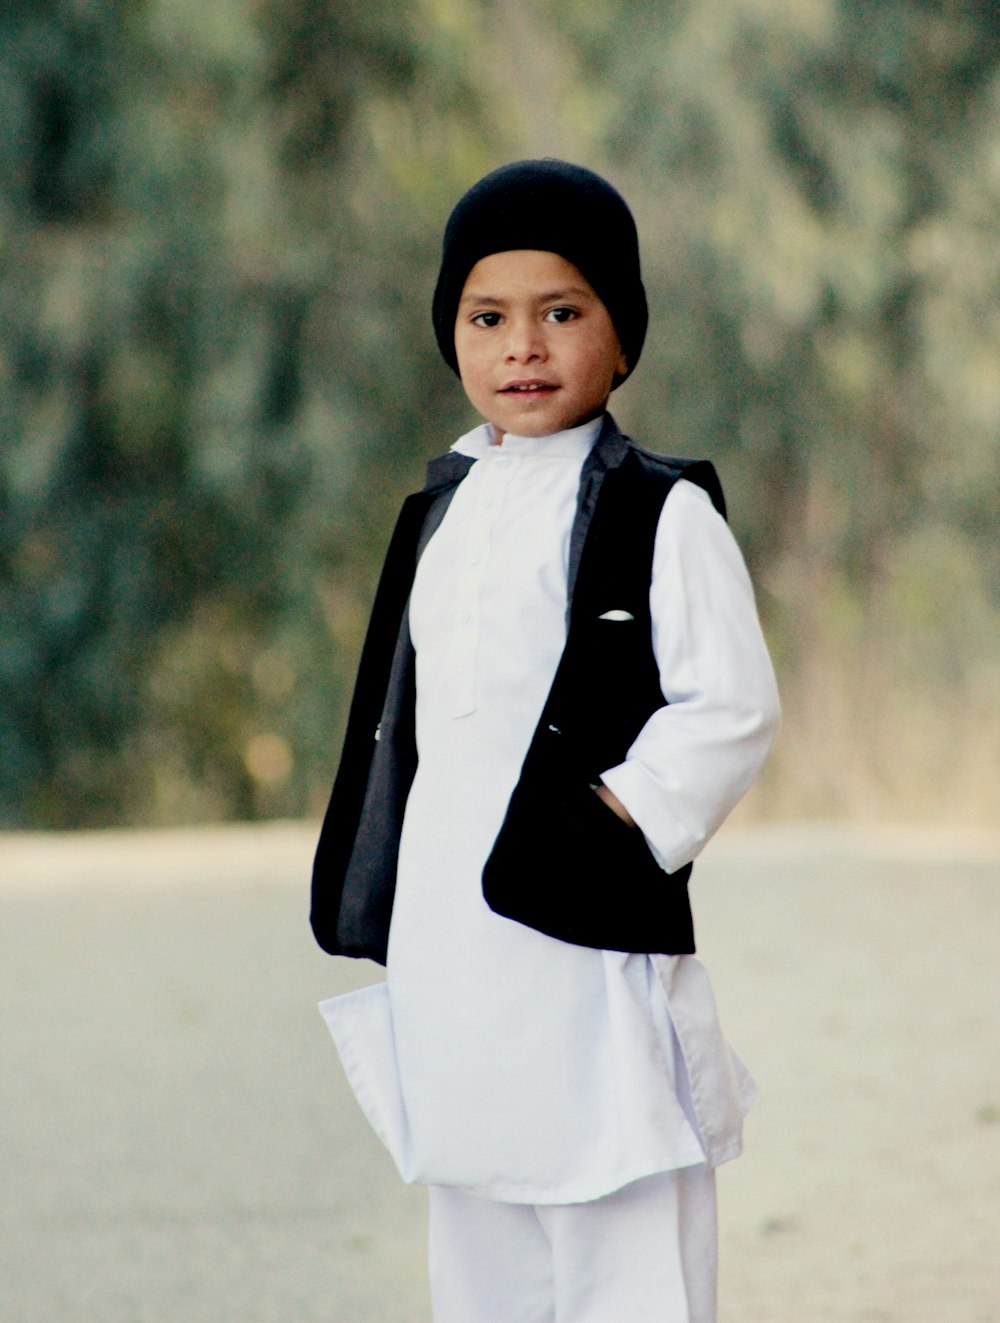 a young boy dressed in white and black